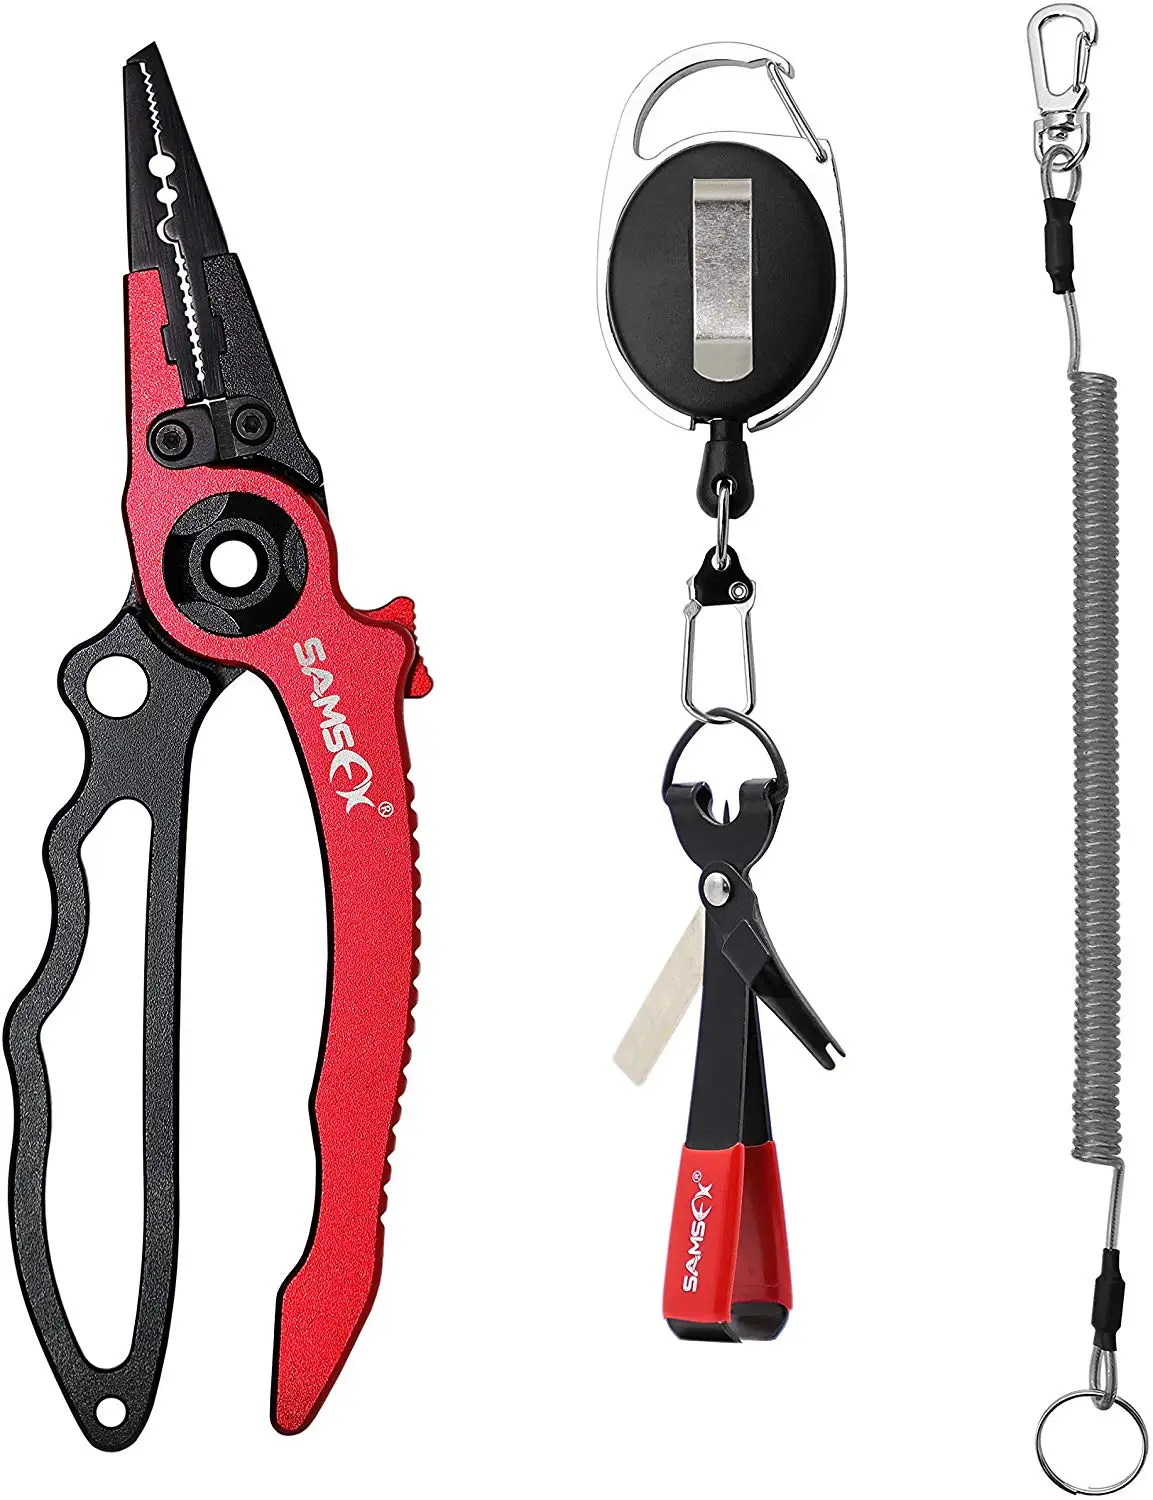 SAMSFX Aluminum Fishing Pliers Saltwater with Camo Sheath Non-Slip Rubber  Grip Handles Tungsten Carbide Cutters Split Ring Hook Remover Tools Fly